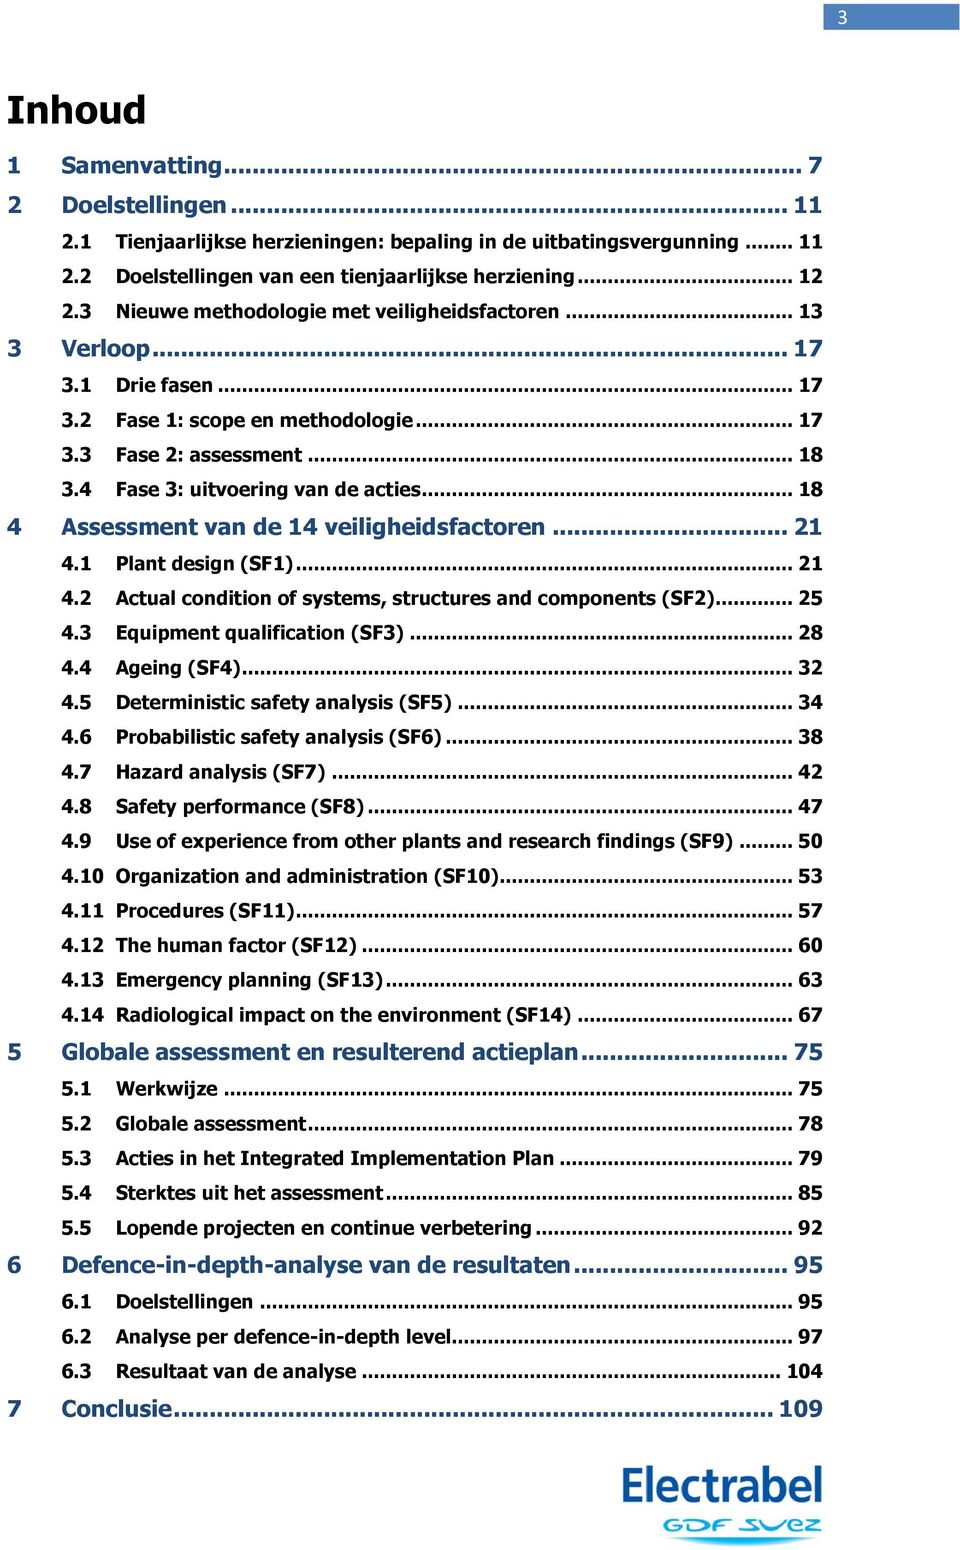 .. 18 4 Assessment van de 14 veiligheidsfactoren... 21 4.1 Plant design (SF1)... 21 4.2 Actual condition of systems, structures and components (SF2)... 25 4.3 Equipment qualification (SF3)... 28 4.